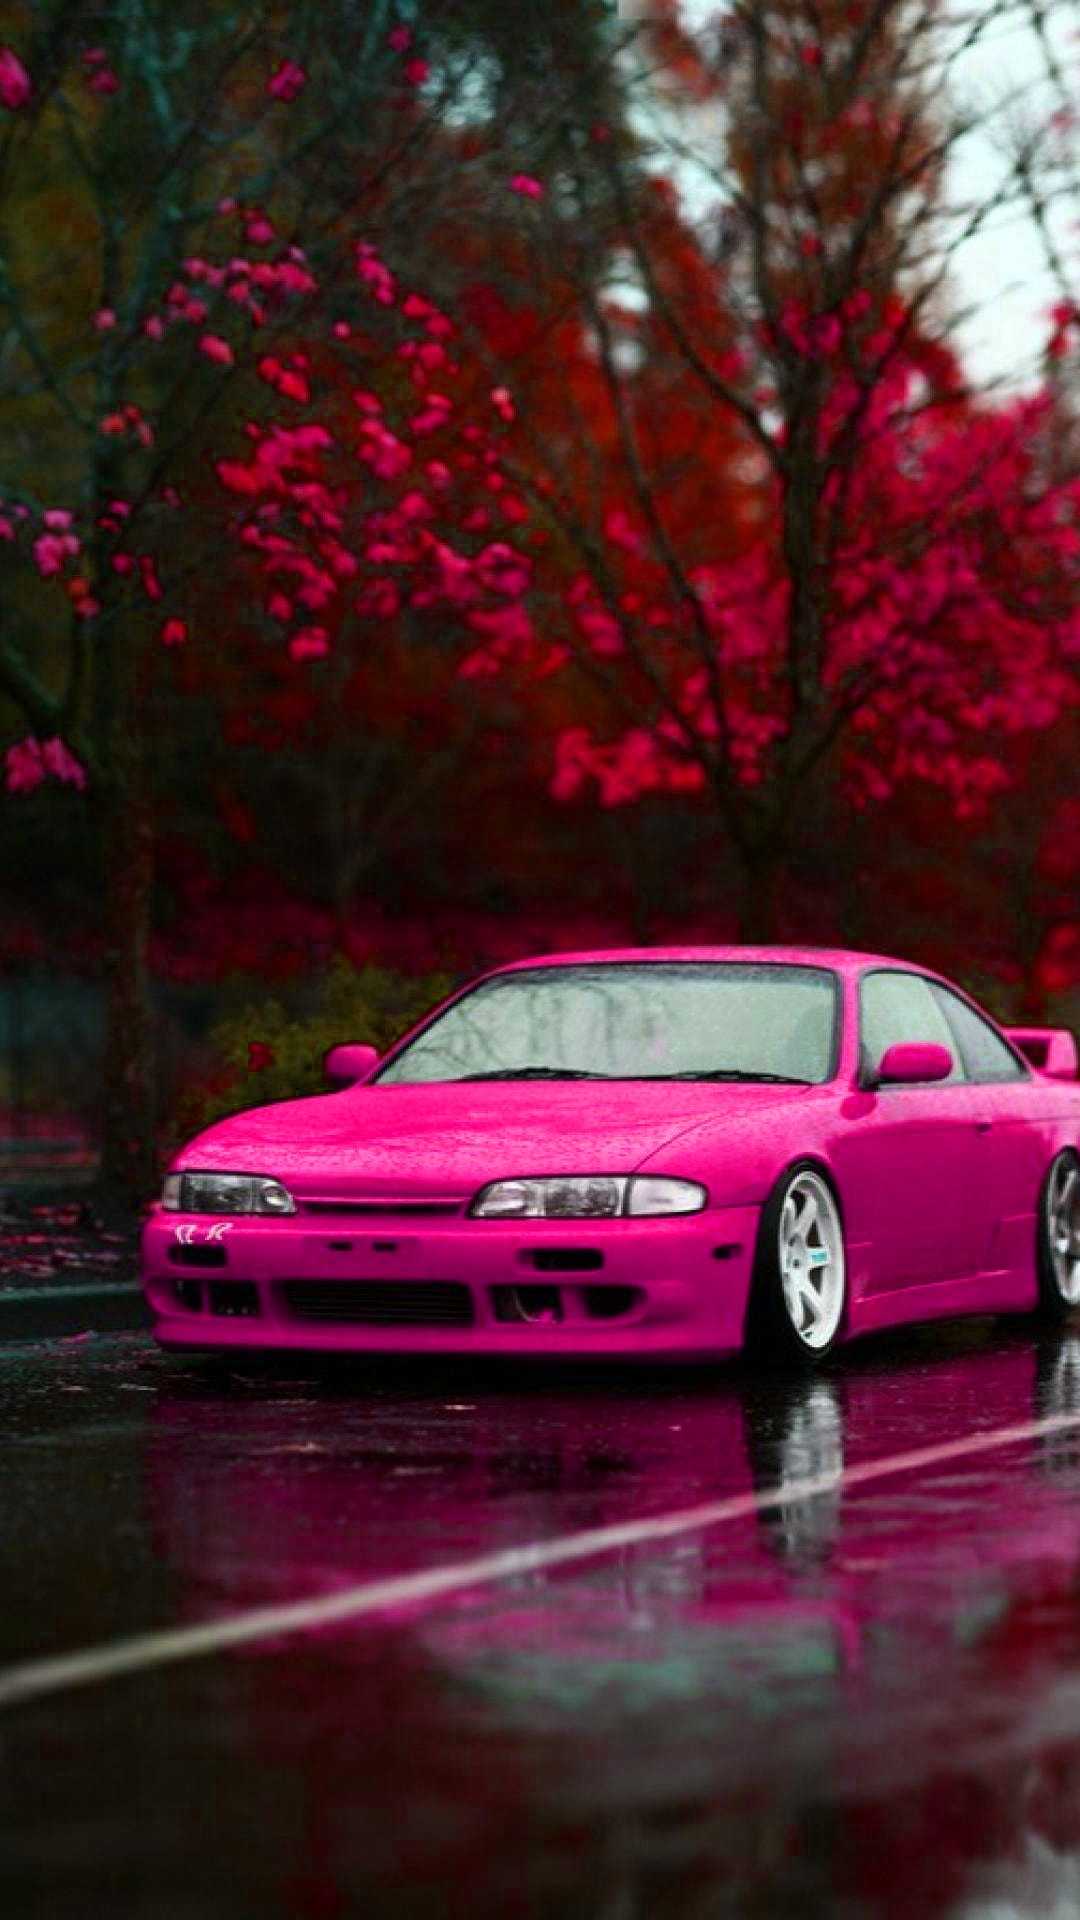 A pink car parked on the street - JDM